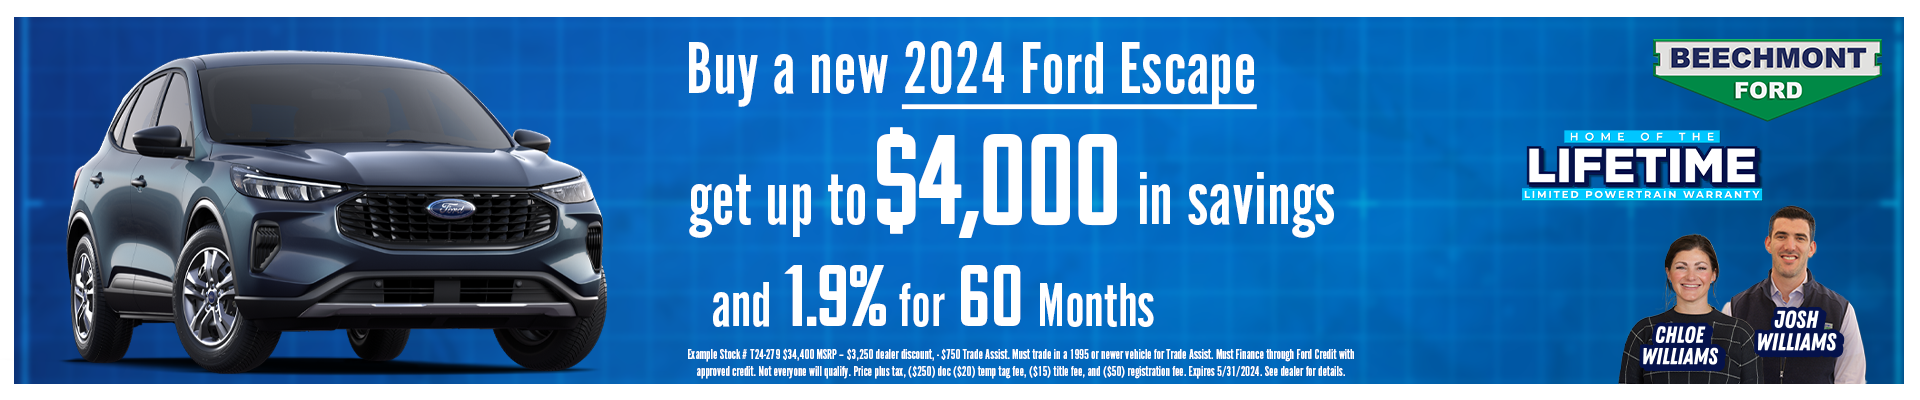 Beechmont Ford Inc | Low Interest Rates